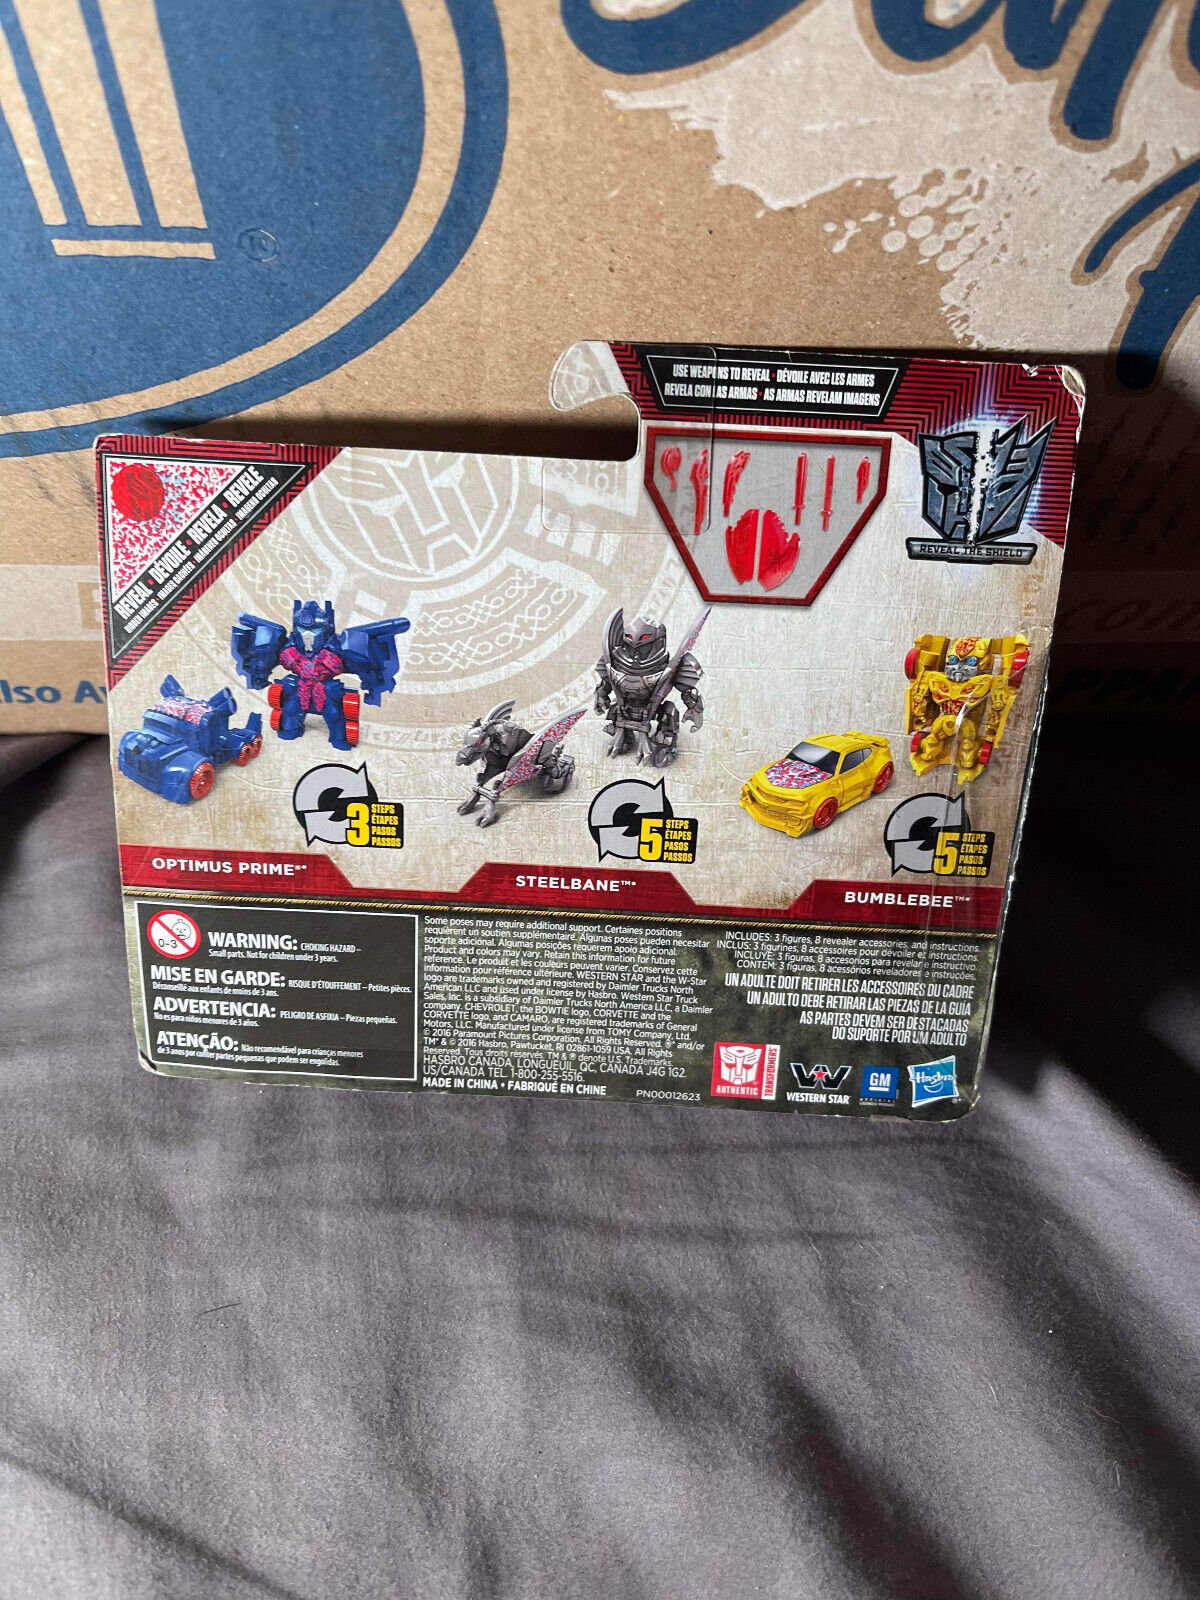 Hasbro TRANSFORMERS Last Knight Tiny Turbo Changers Target Exclusive.